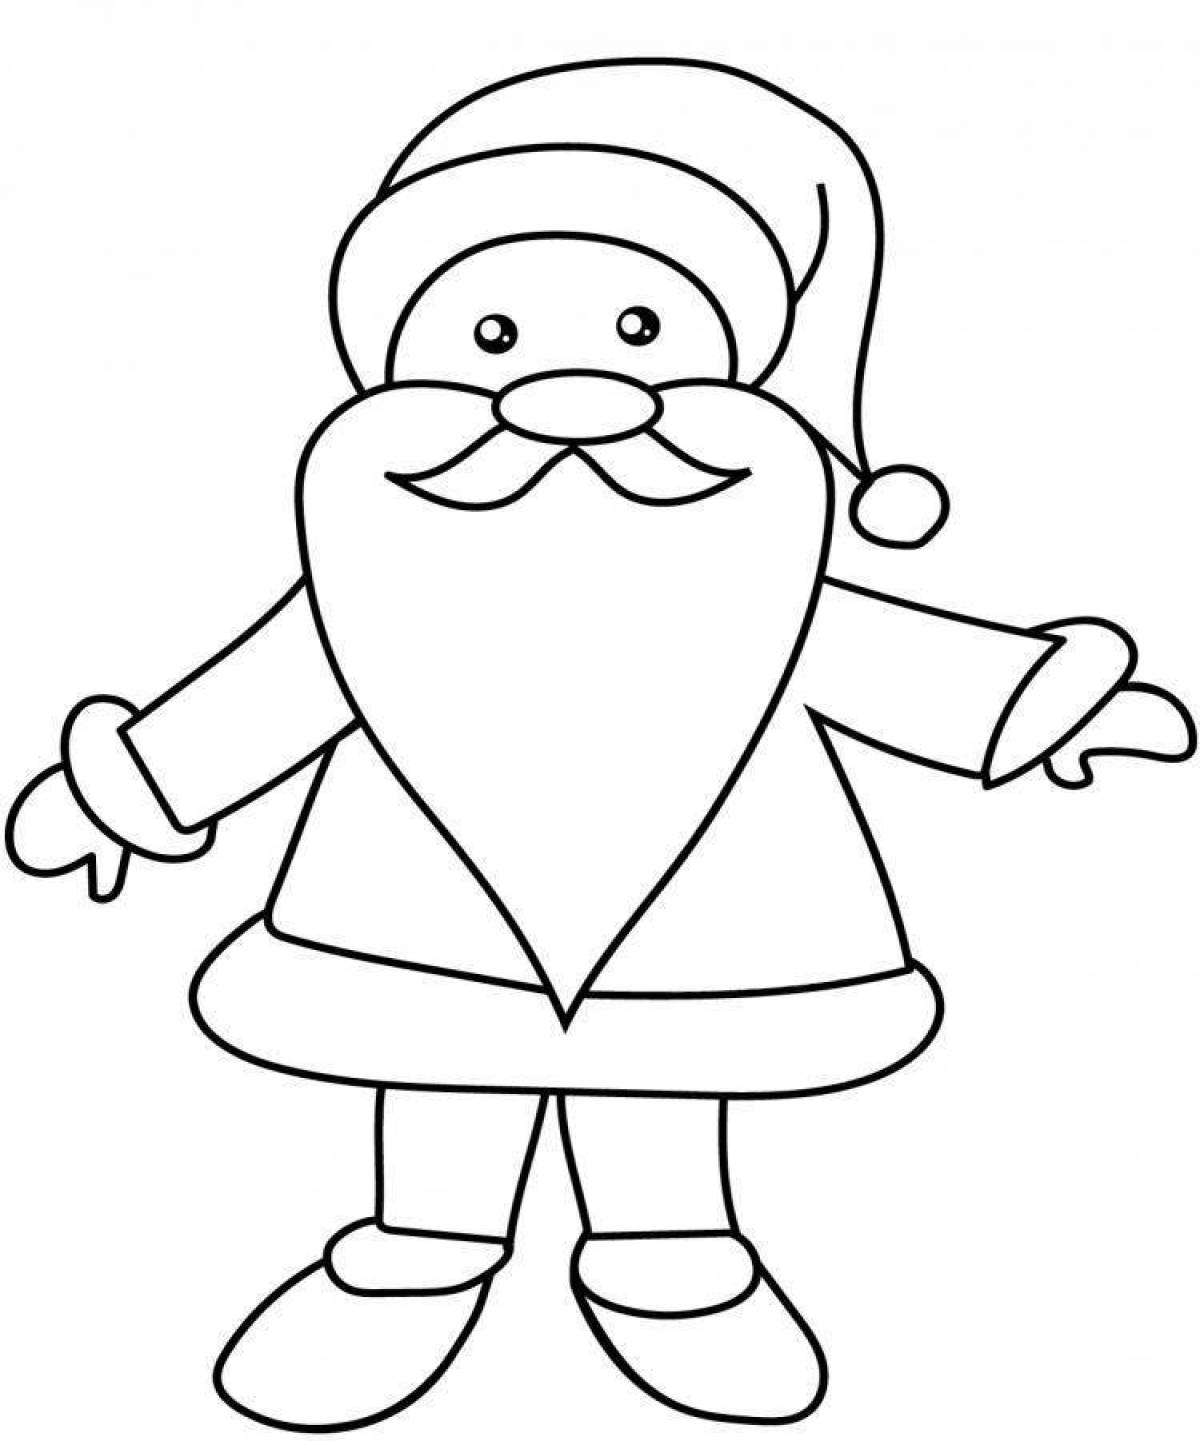 Colouring funny santa claus for kids